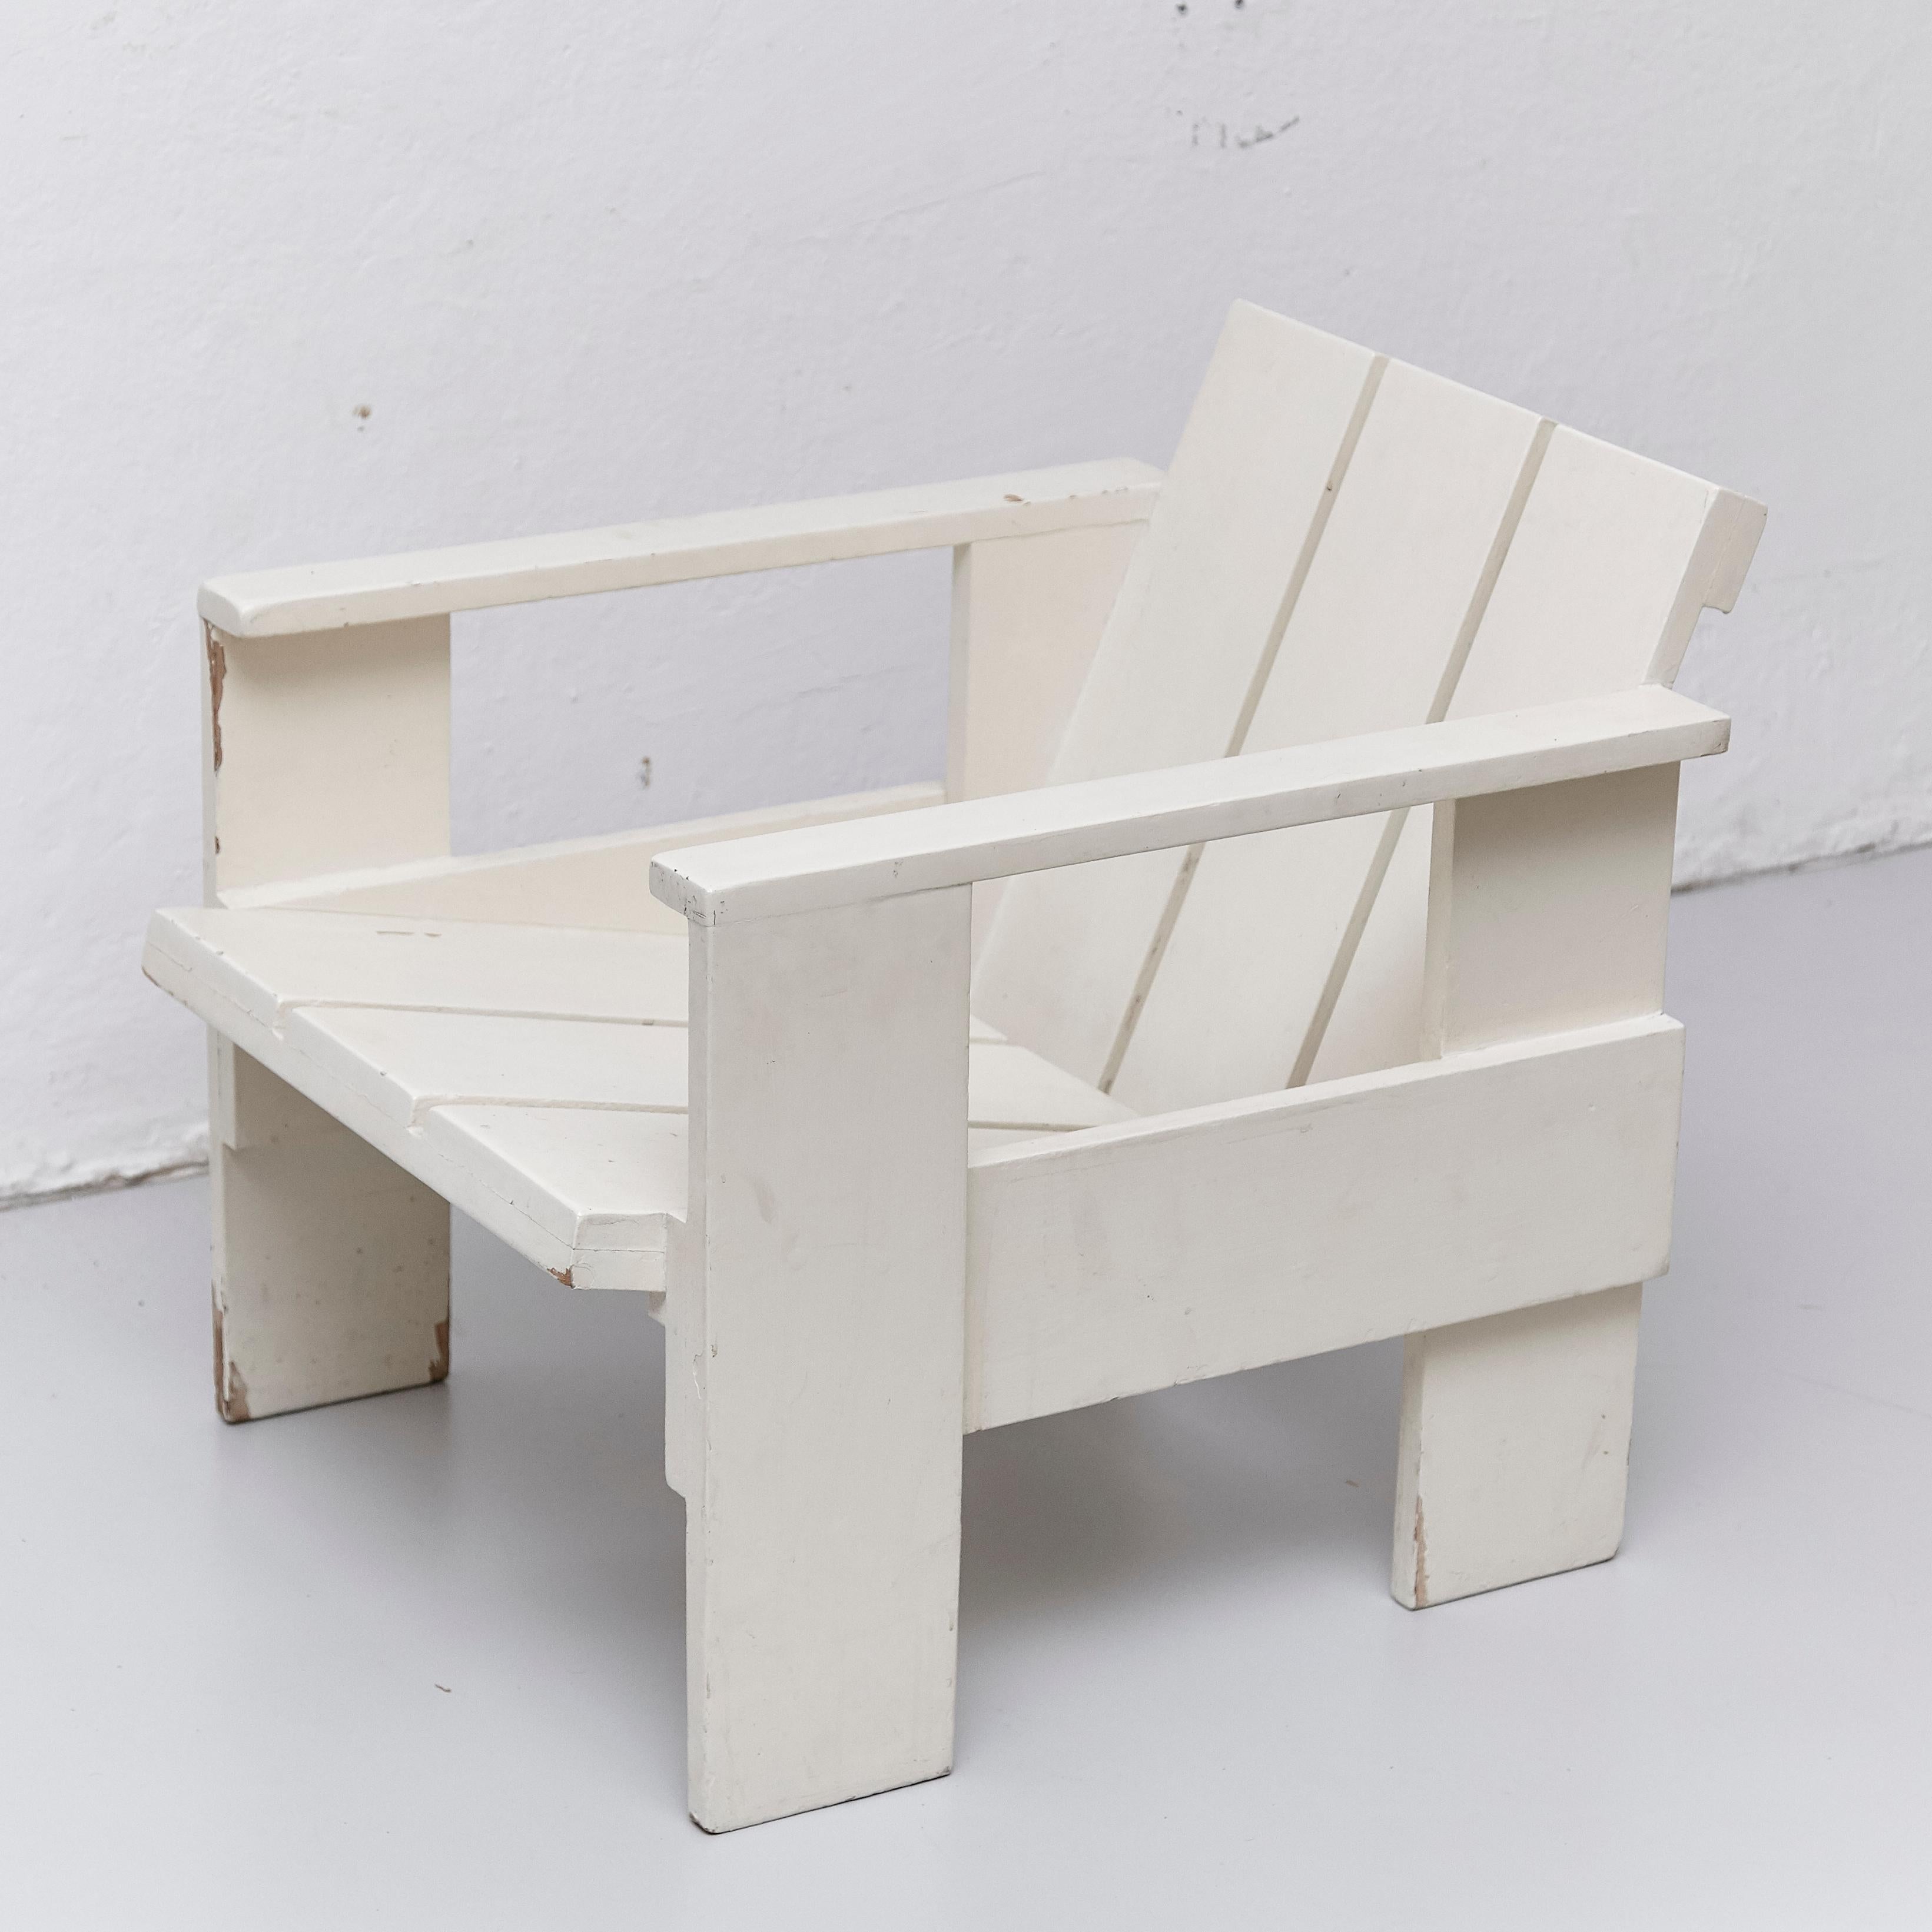 Lacquered After Gerrit Rietveld Mid-Century Modern White Wood Crate Chair, circa 1950